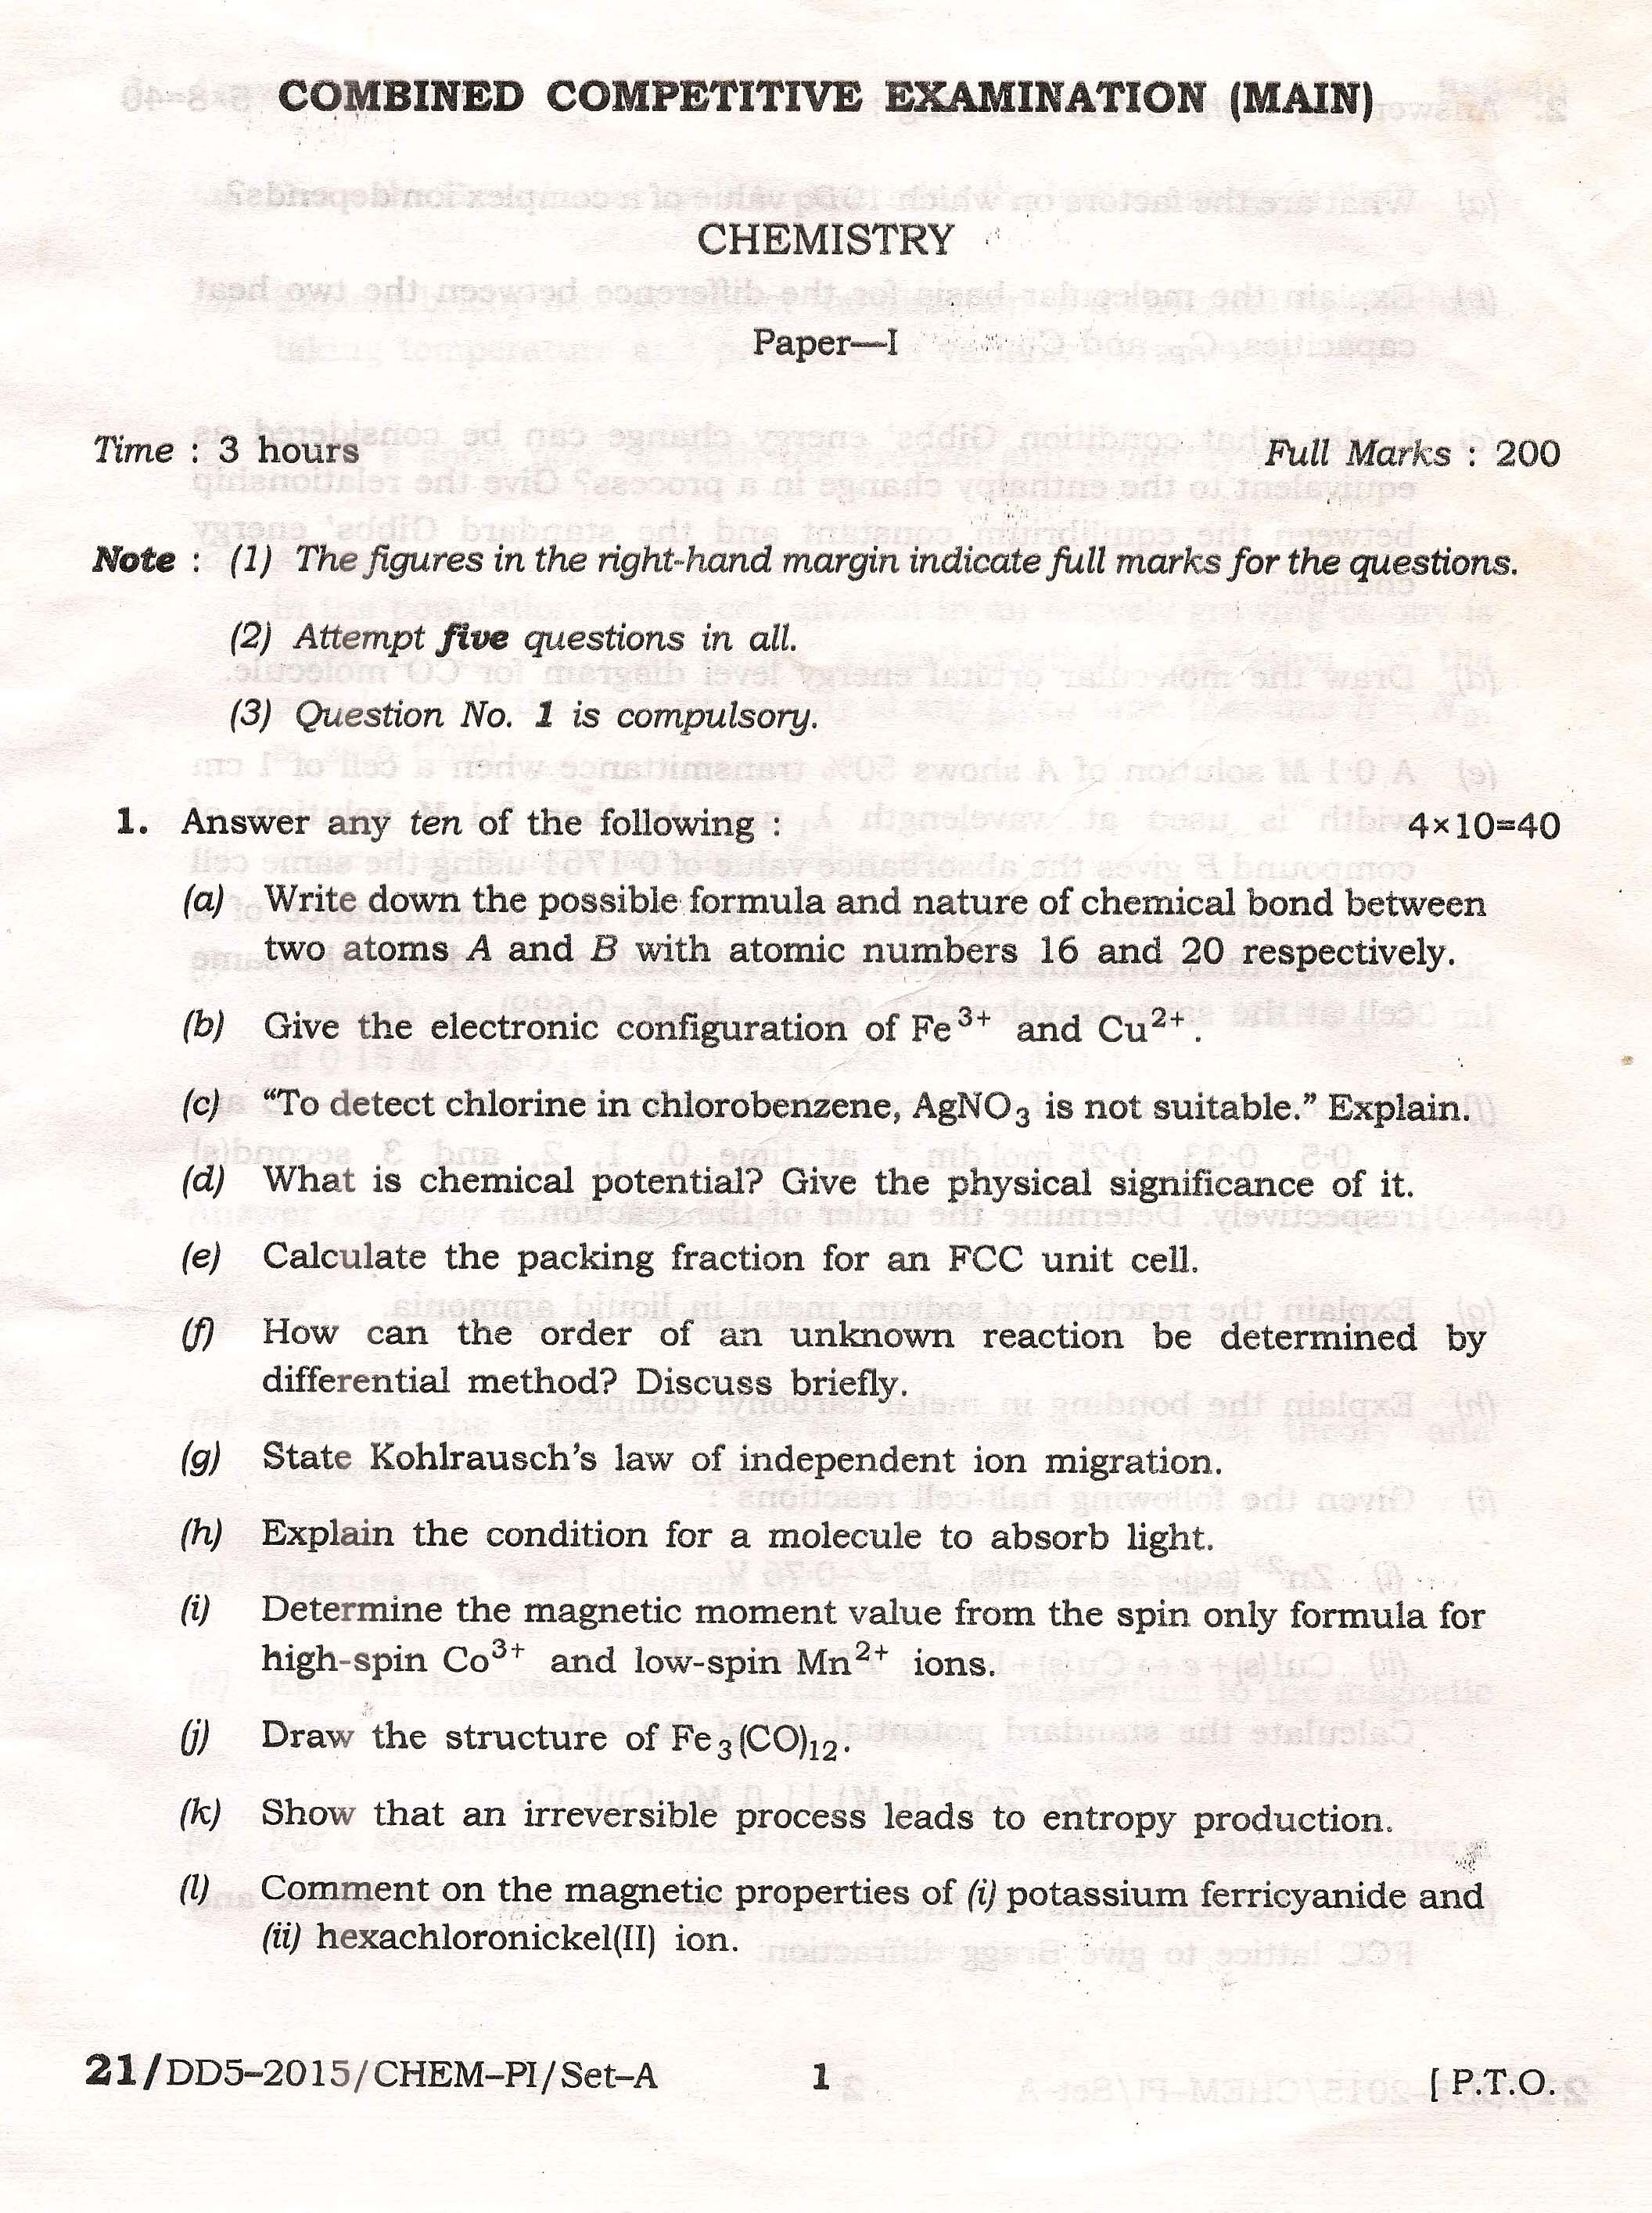 APPSC Combined Competitive Main Exam 2015 Chemistry Paper I 1